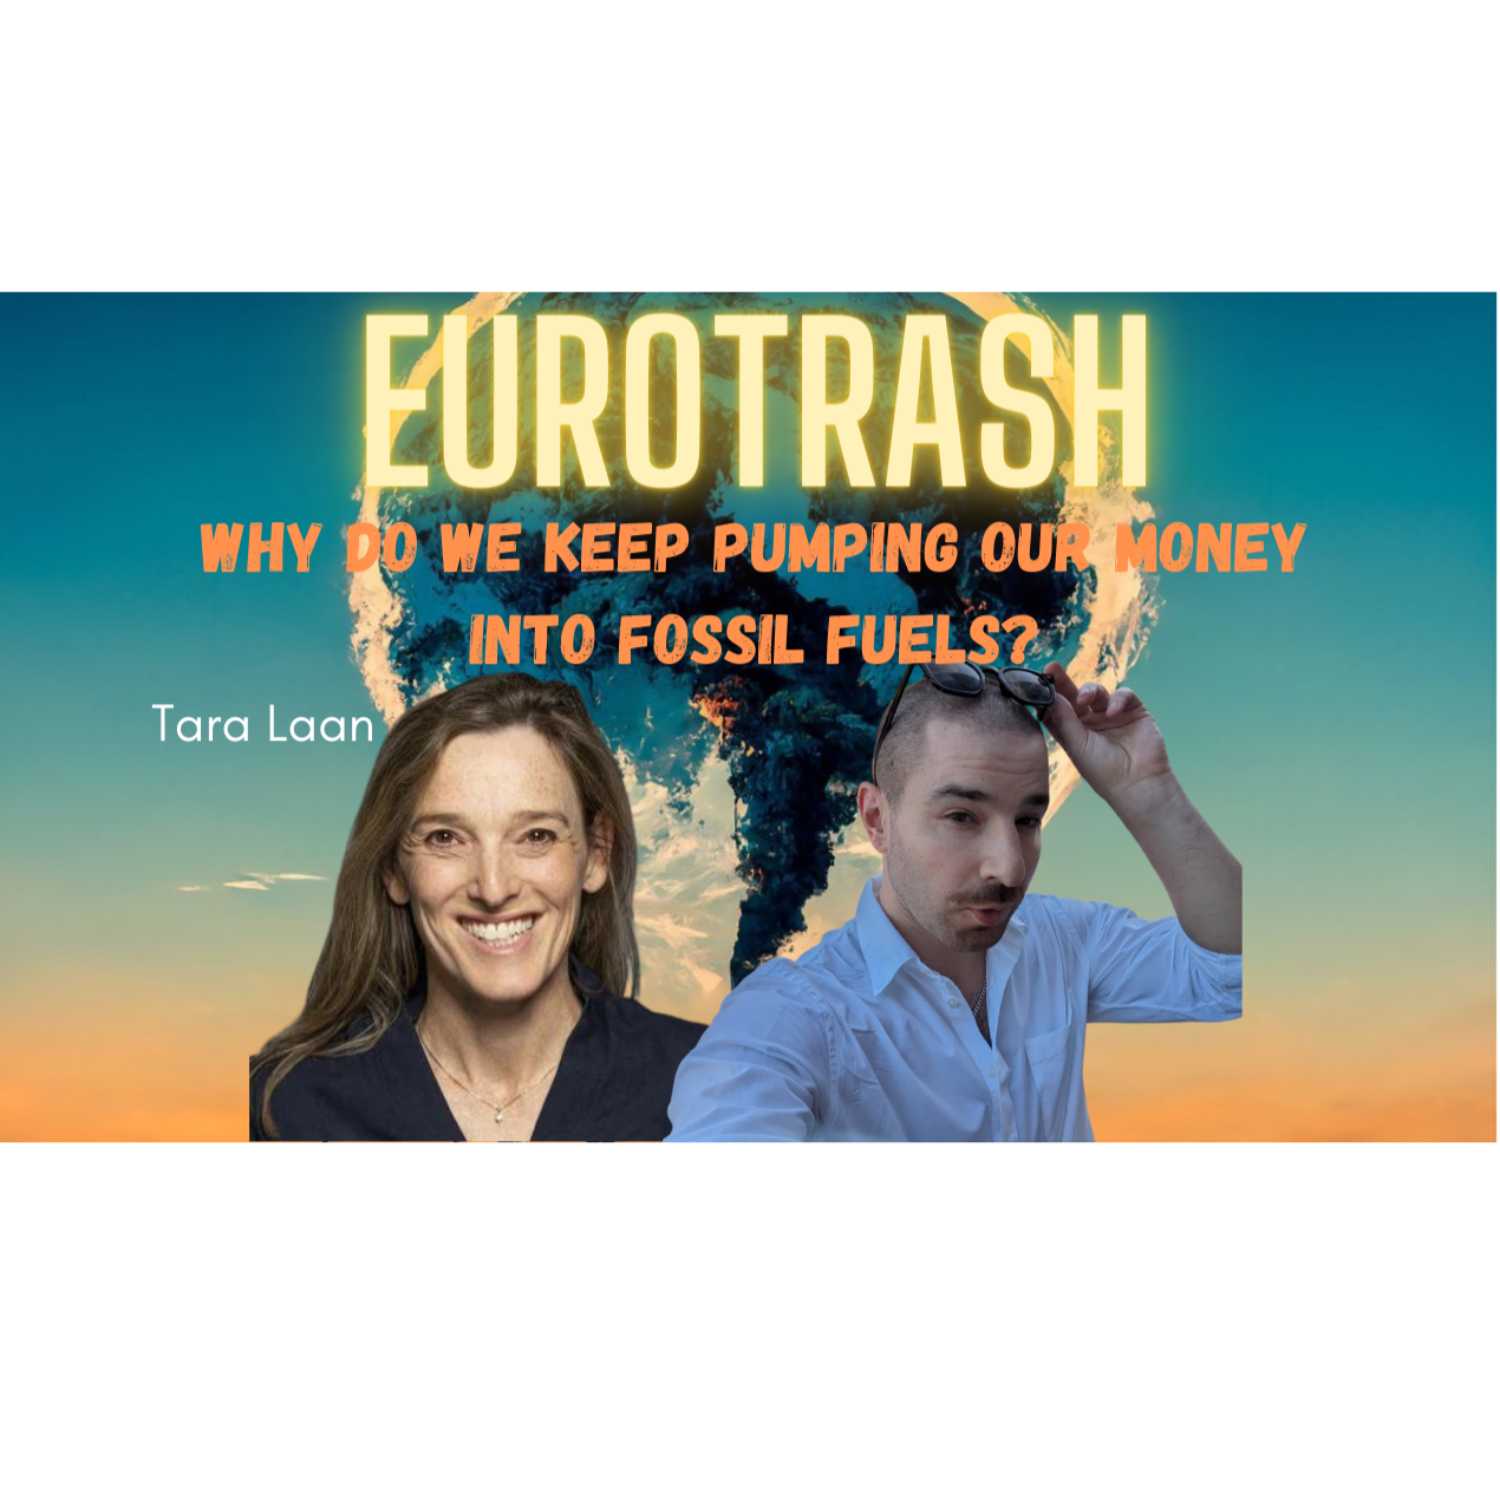 Funding our own Demise: Why do we keep pumping money into FOSSIL FUELS, with IISD's Tara Laan